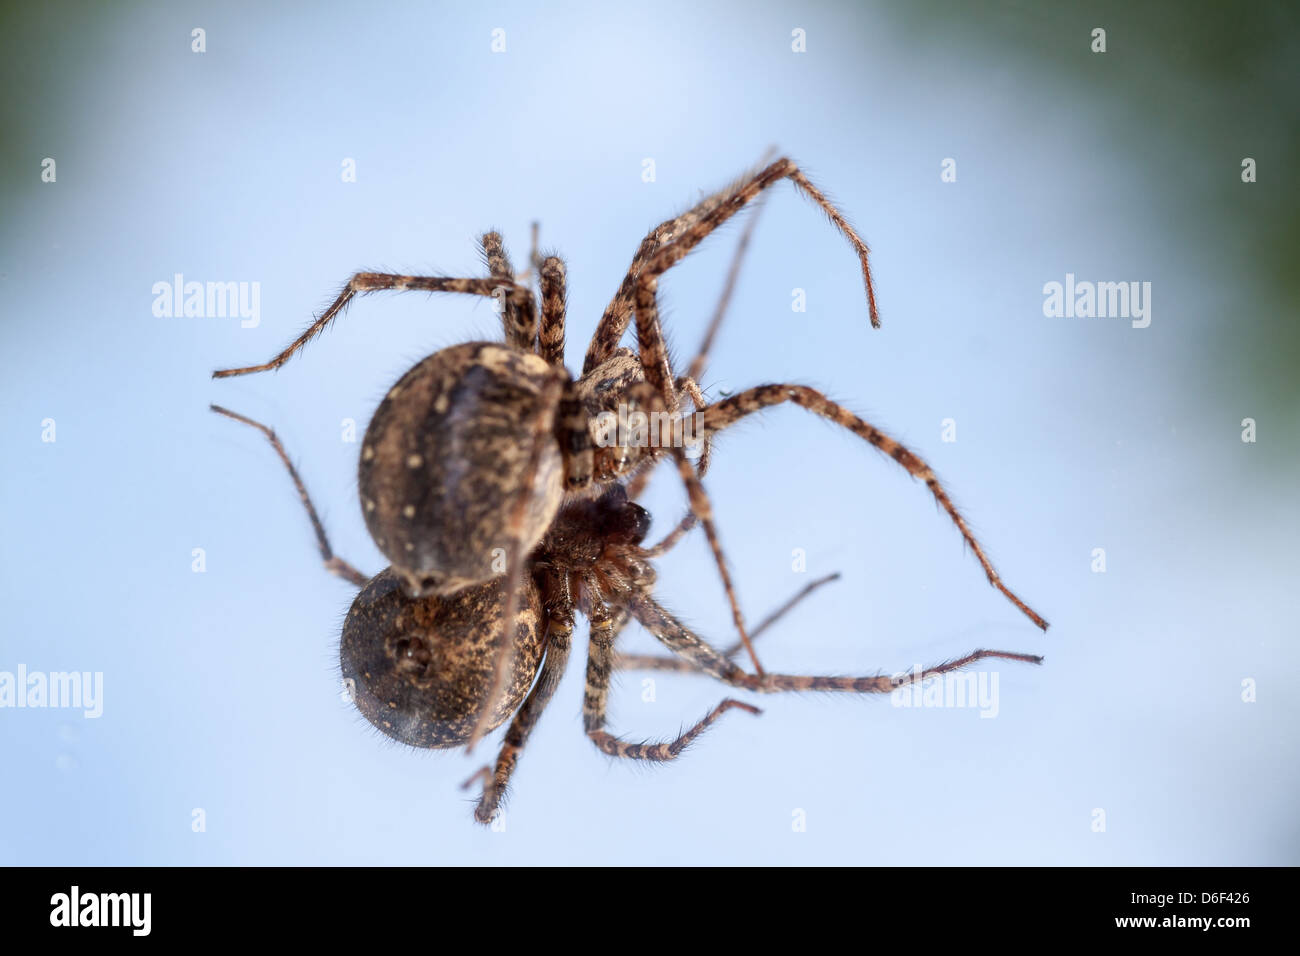 Berlin, Germany, a Four-spotted spider Stock Photo